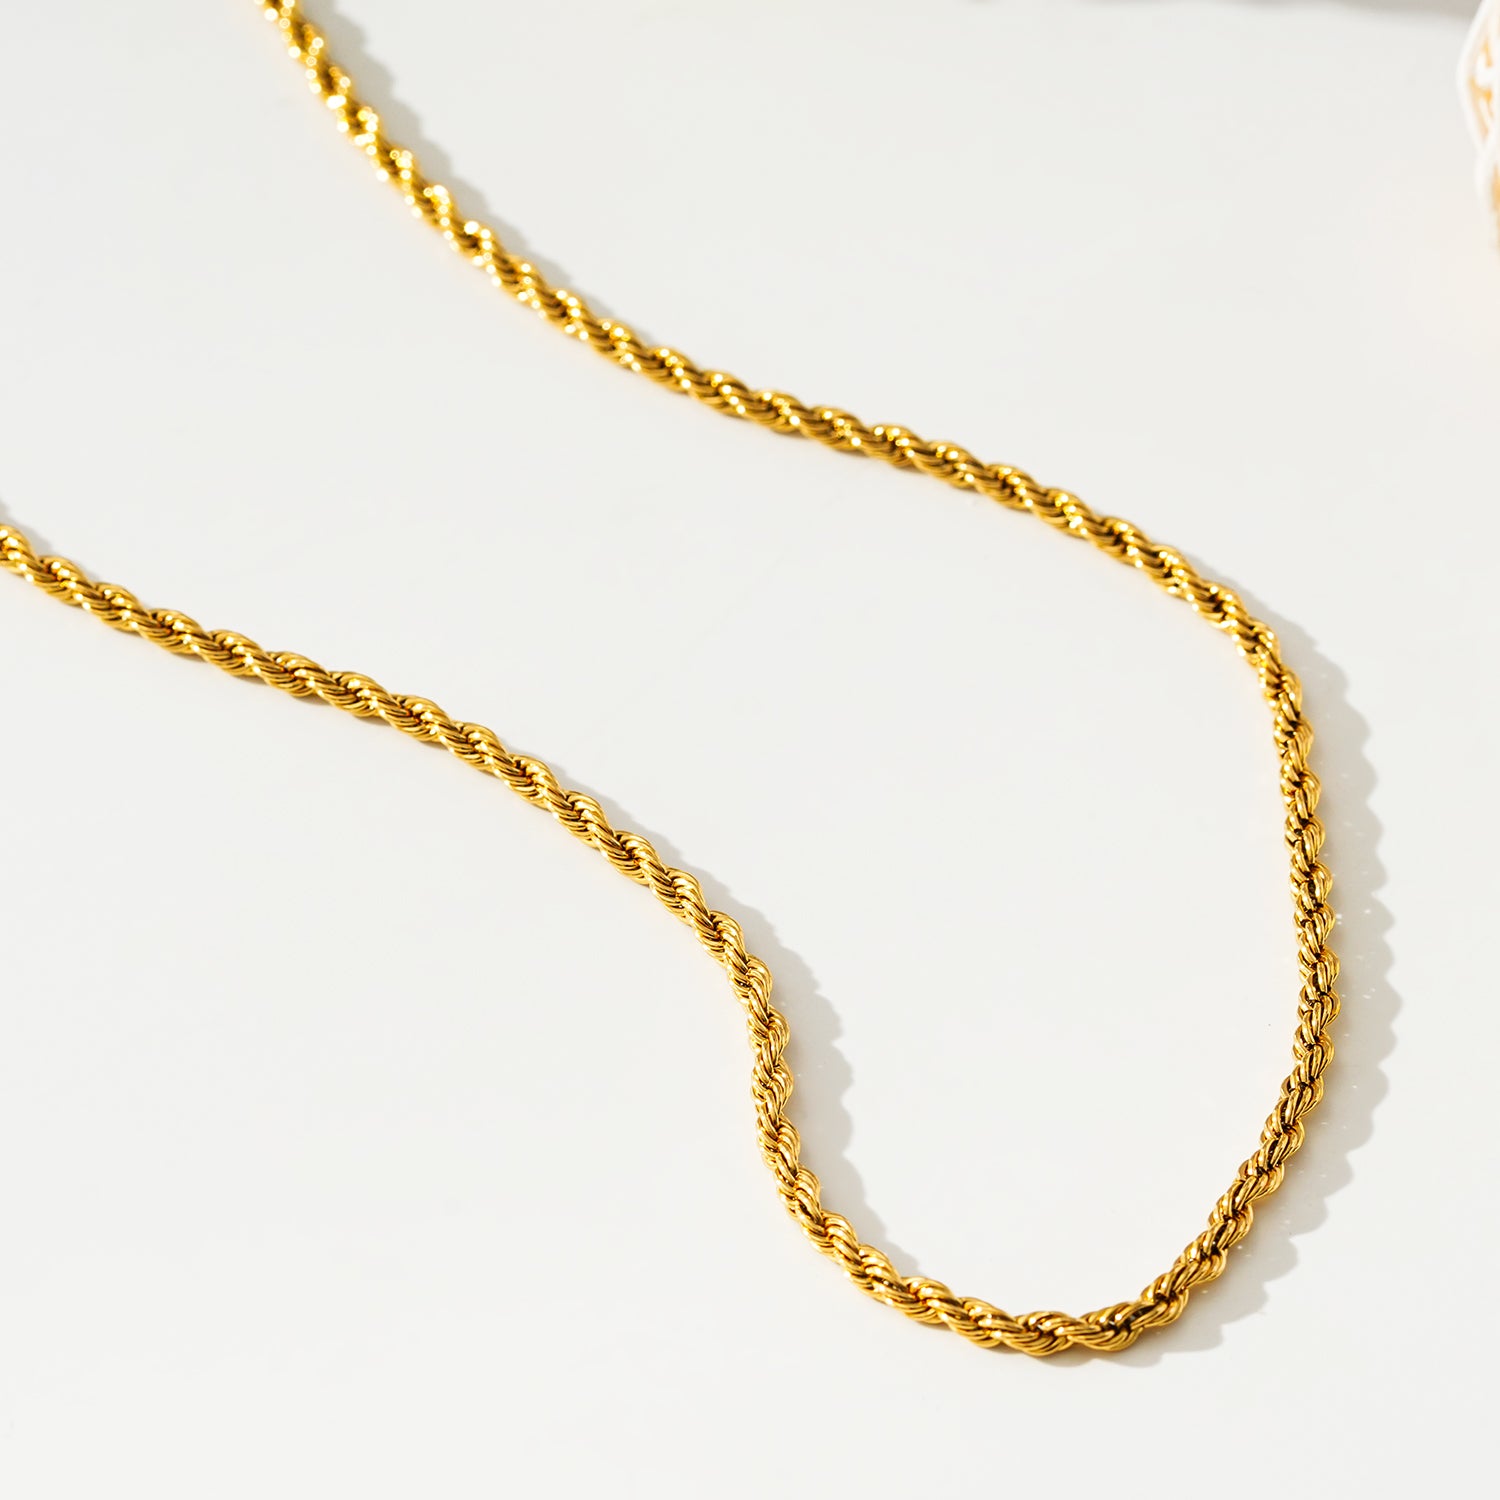 Style BALHAM 7678: Rope Chain Textured Gold Necklace